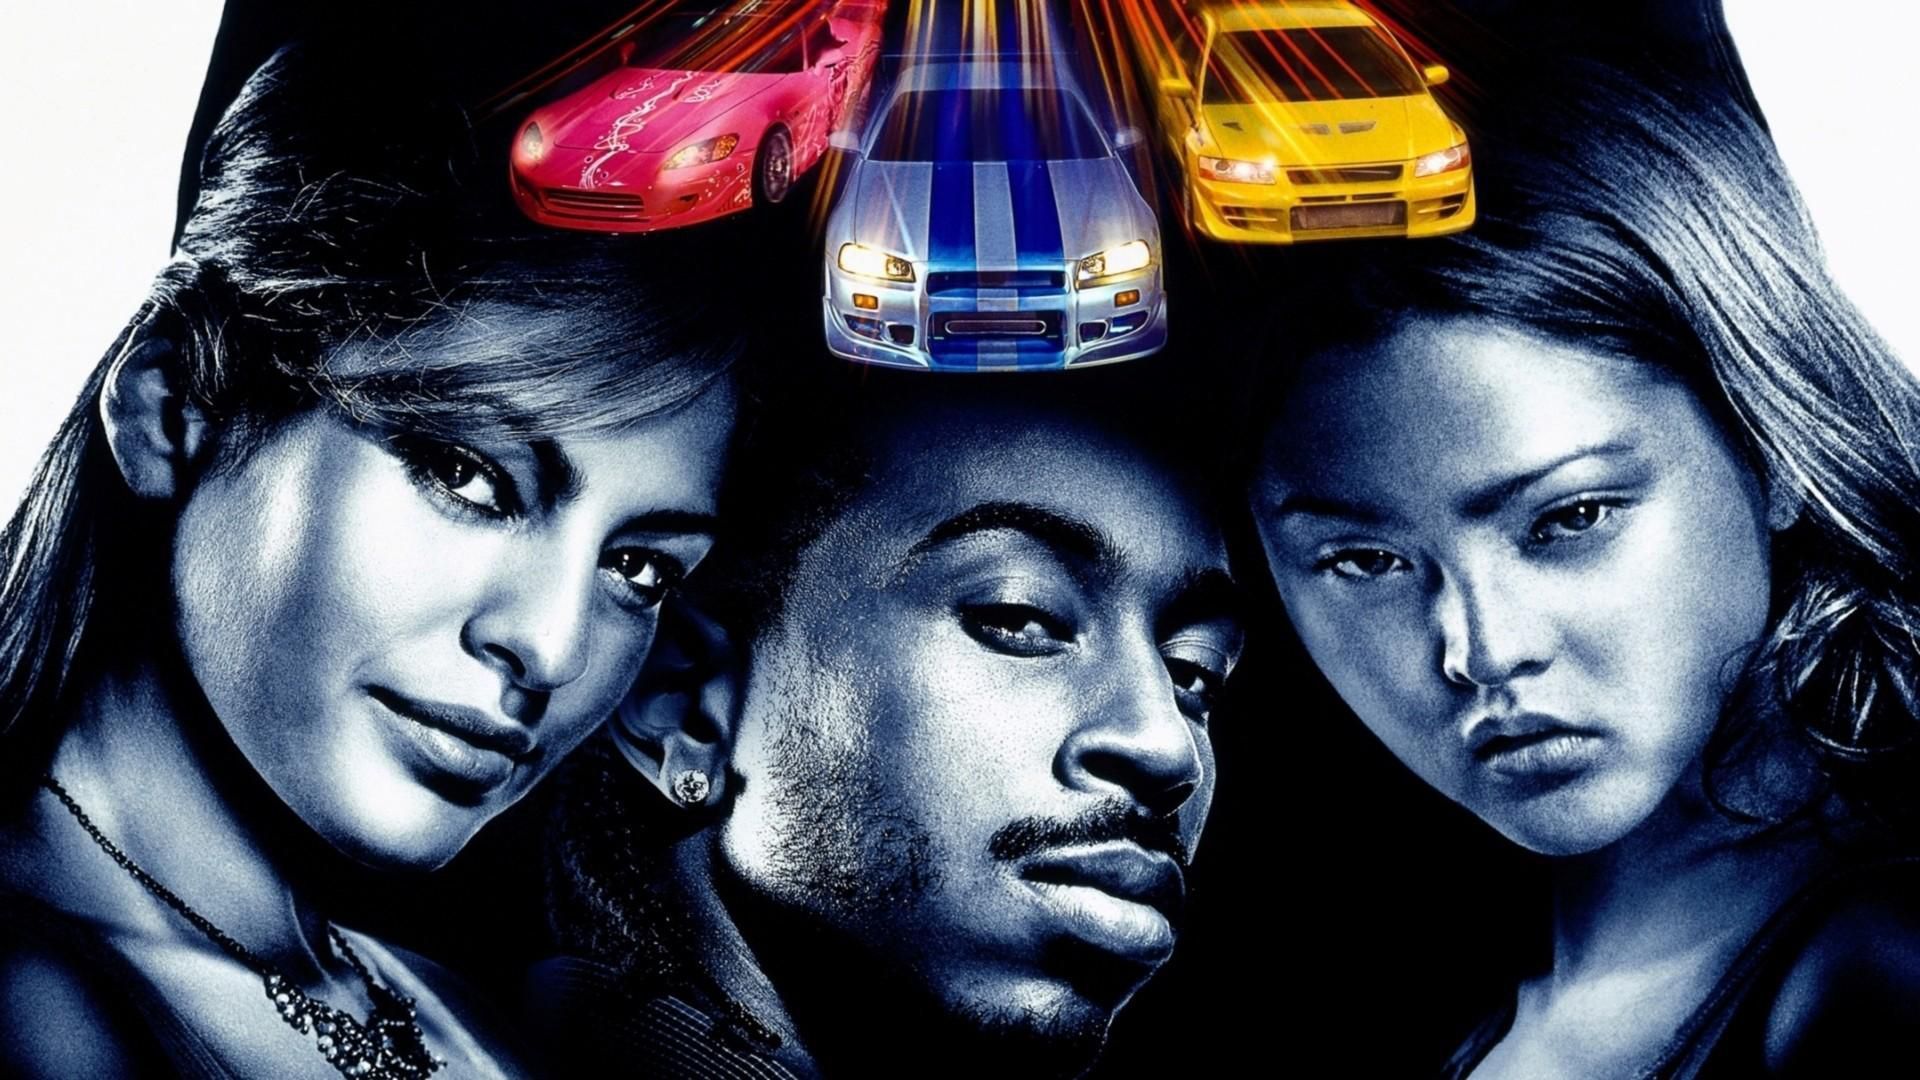 2 fast 2 furious songs free download